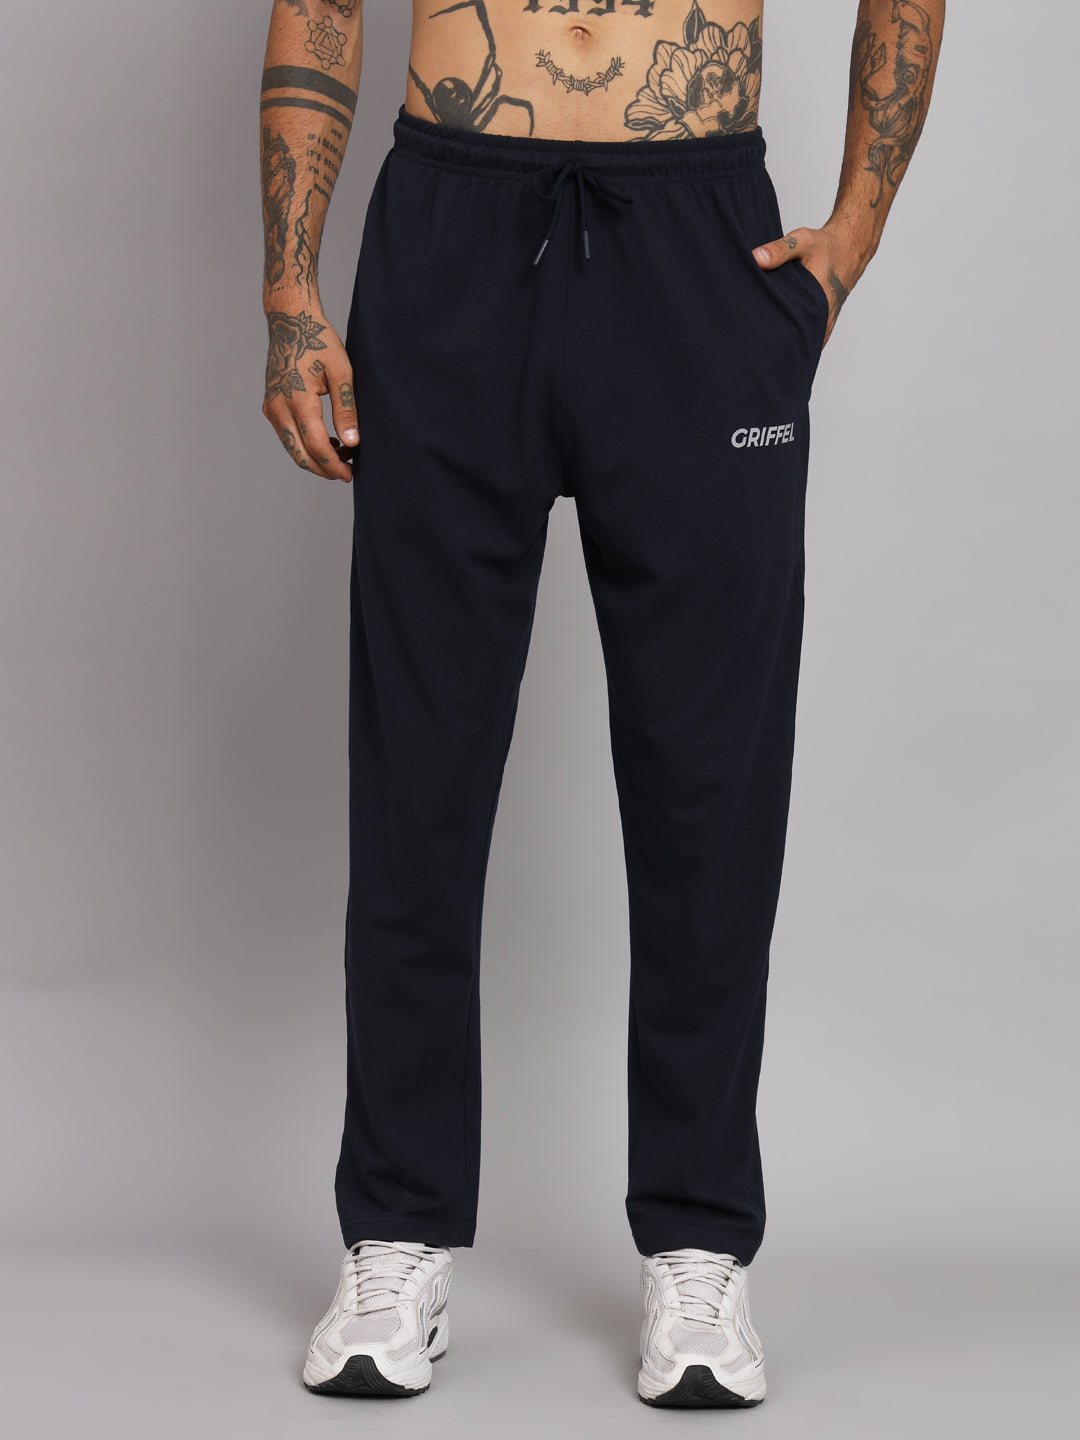 Griffel Men's Pre Winter Front Logo Solid Cotton Basic Hoodie and Joggers Full set Navy Tracksuit - griffel